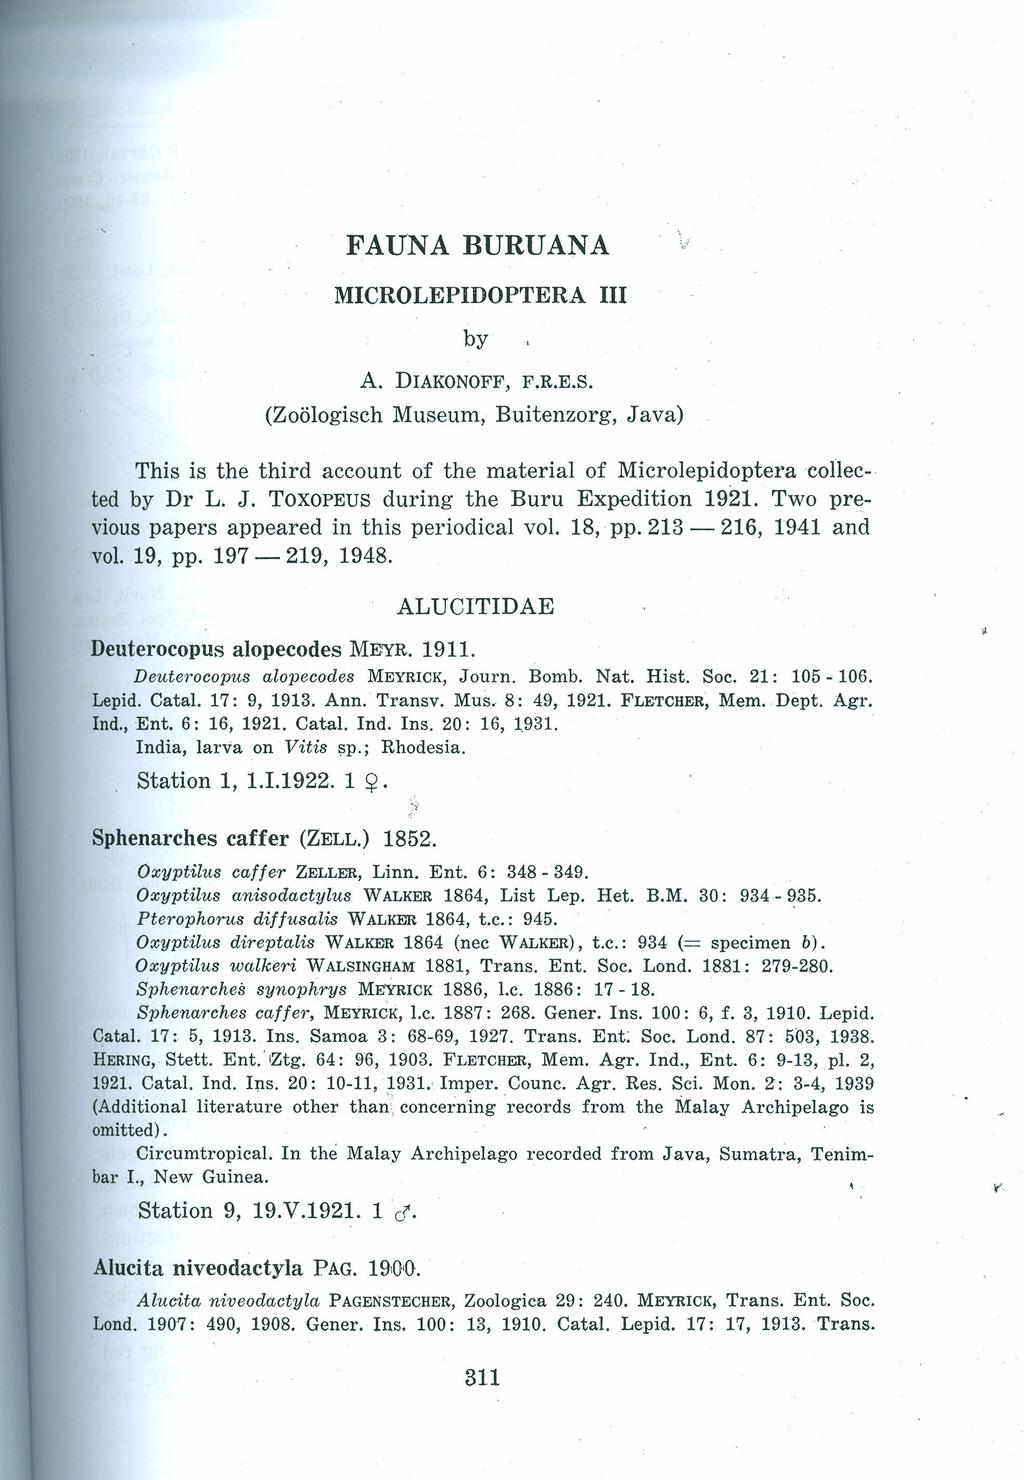 FAUNA BURUANA Vi MICROLEPIDOPTERA III by A. DIAKONOFF, F.R.E.S. (Zoologisch Museum, Buitenzorg, Java) This is the third account of the material of Microlepidopteracollected by Dr L. J. Toxozsus during the Buru Expedition 1921.